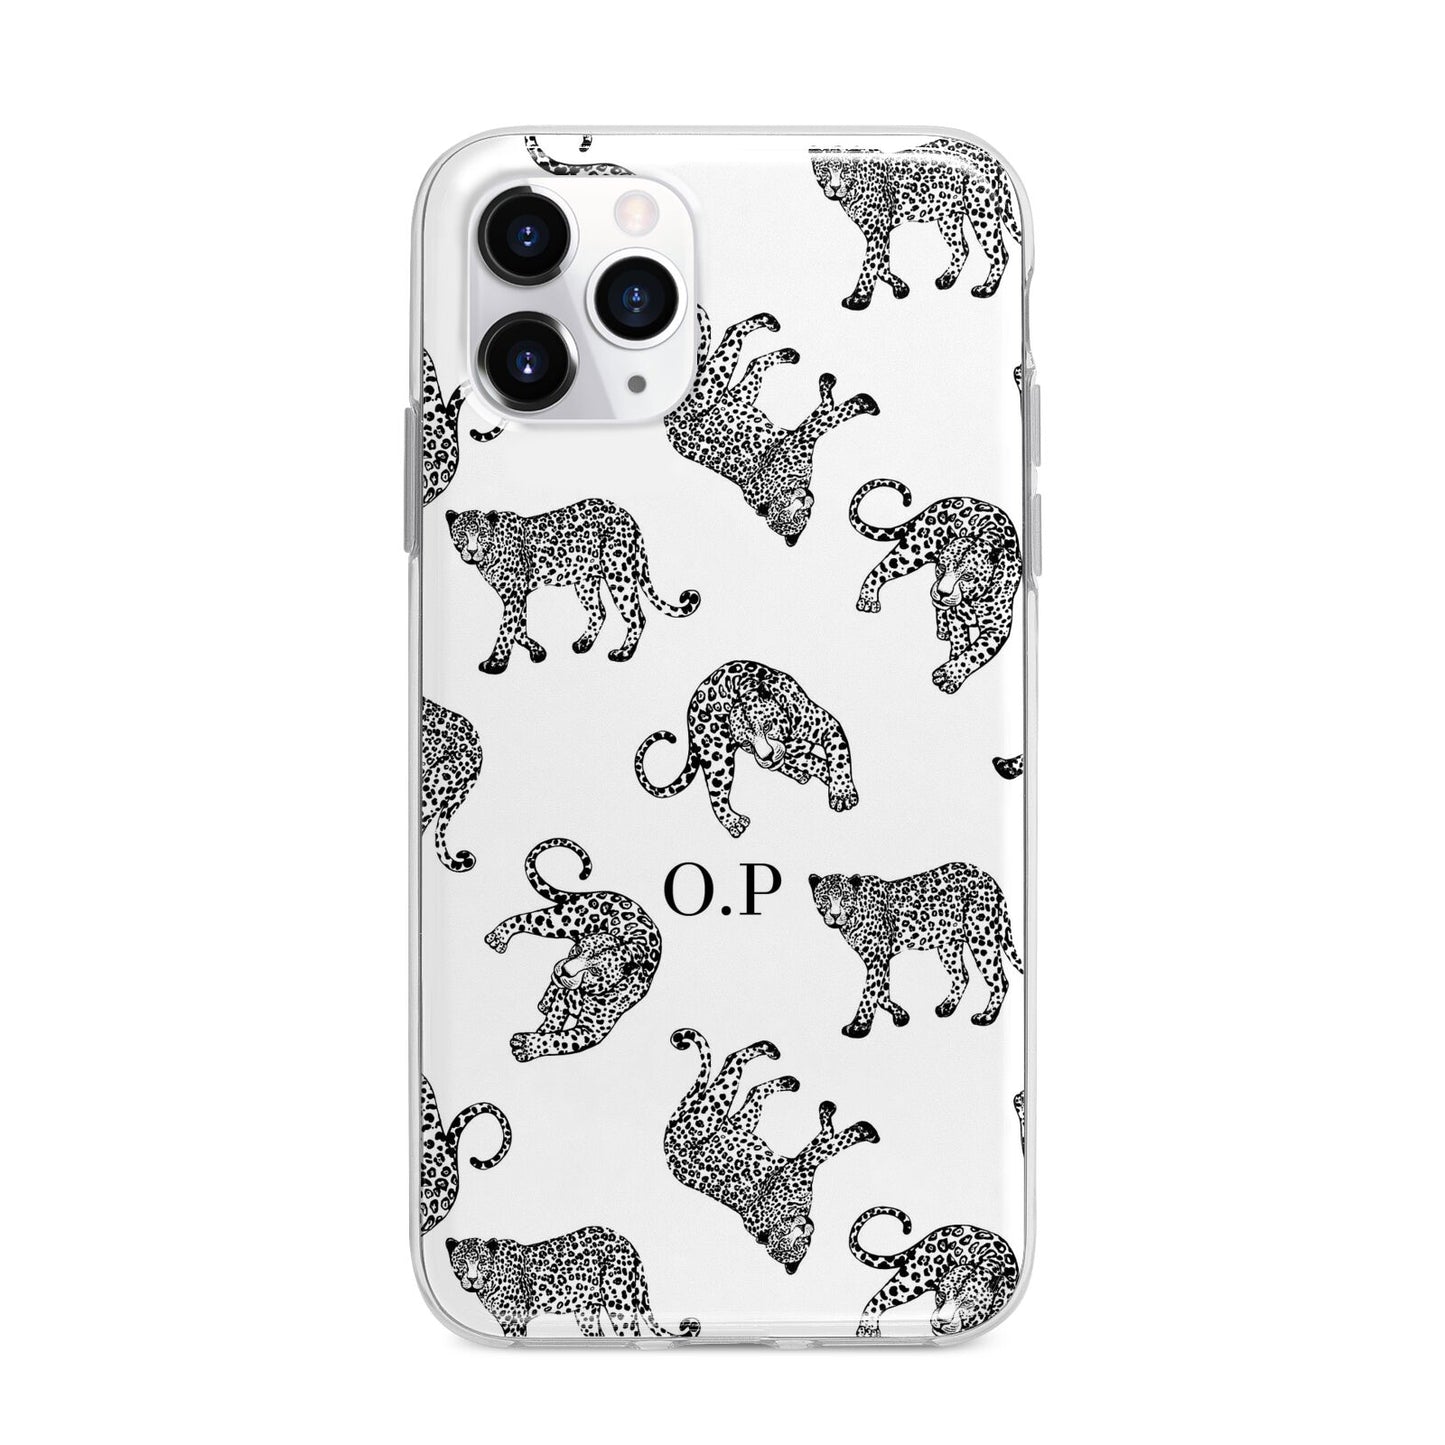 Monochrome Leopard Print Personalised Apple iPhone 11 Pro Max in Silver with Bumper Case